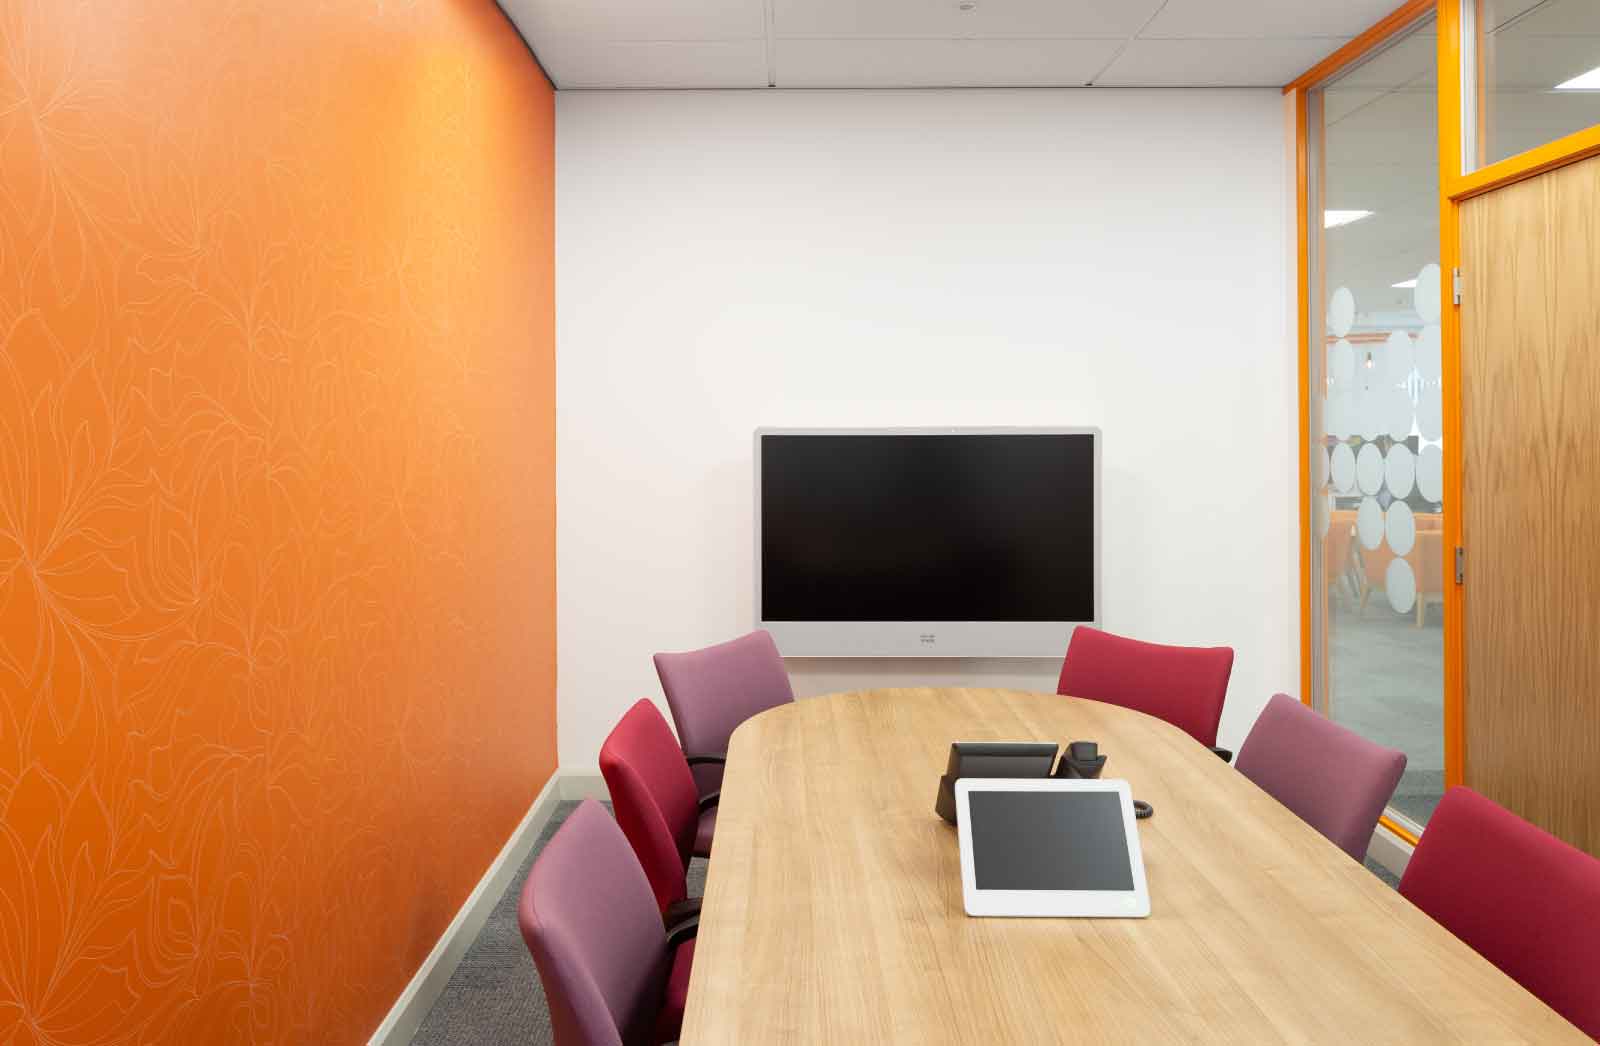 Gordons---Office-Fit-Out-Bradford-usable-meeting-space